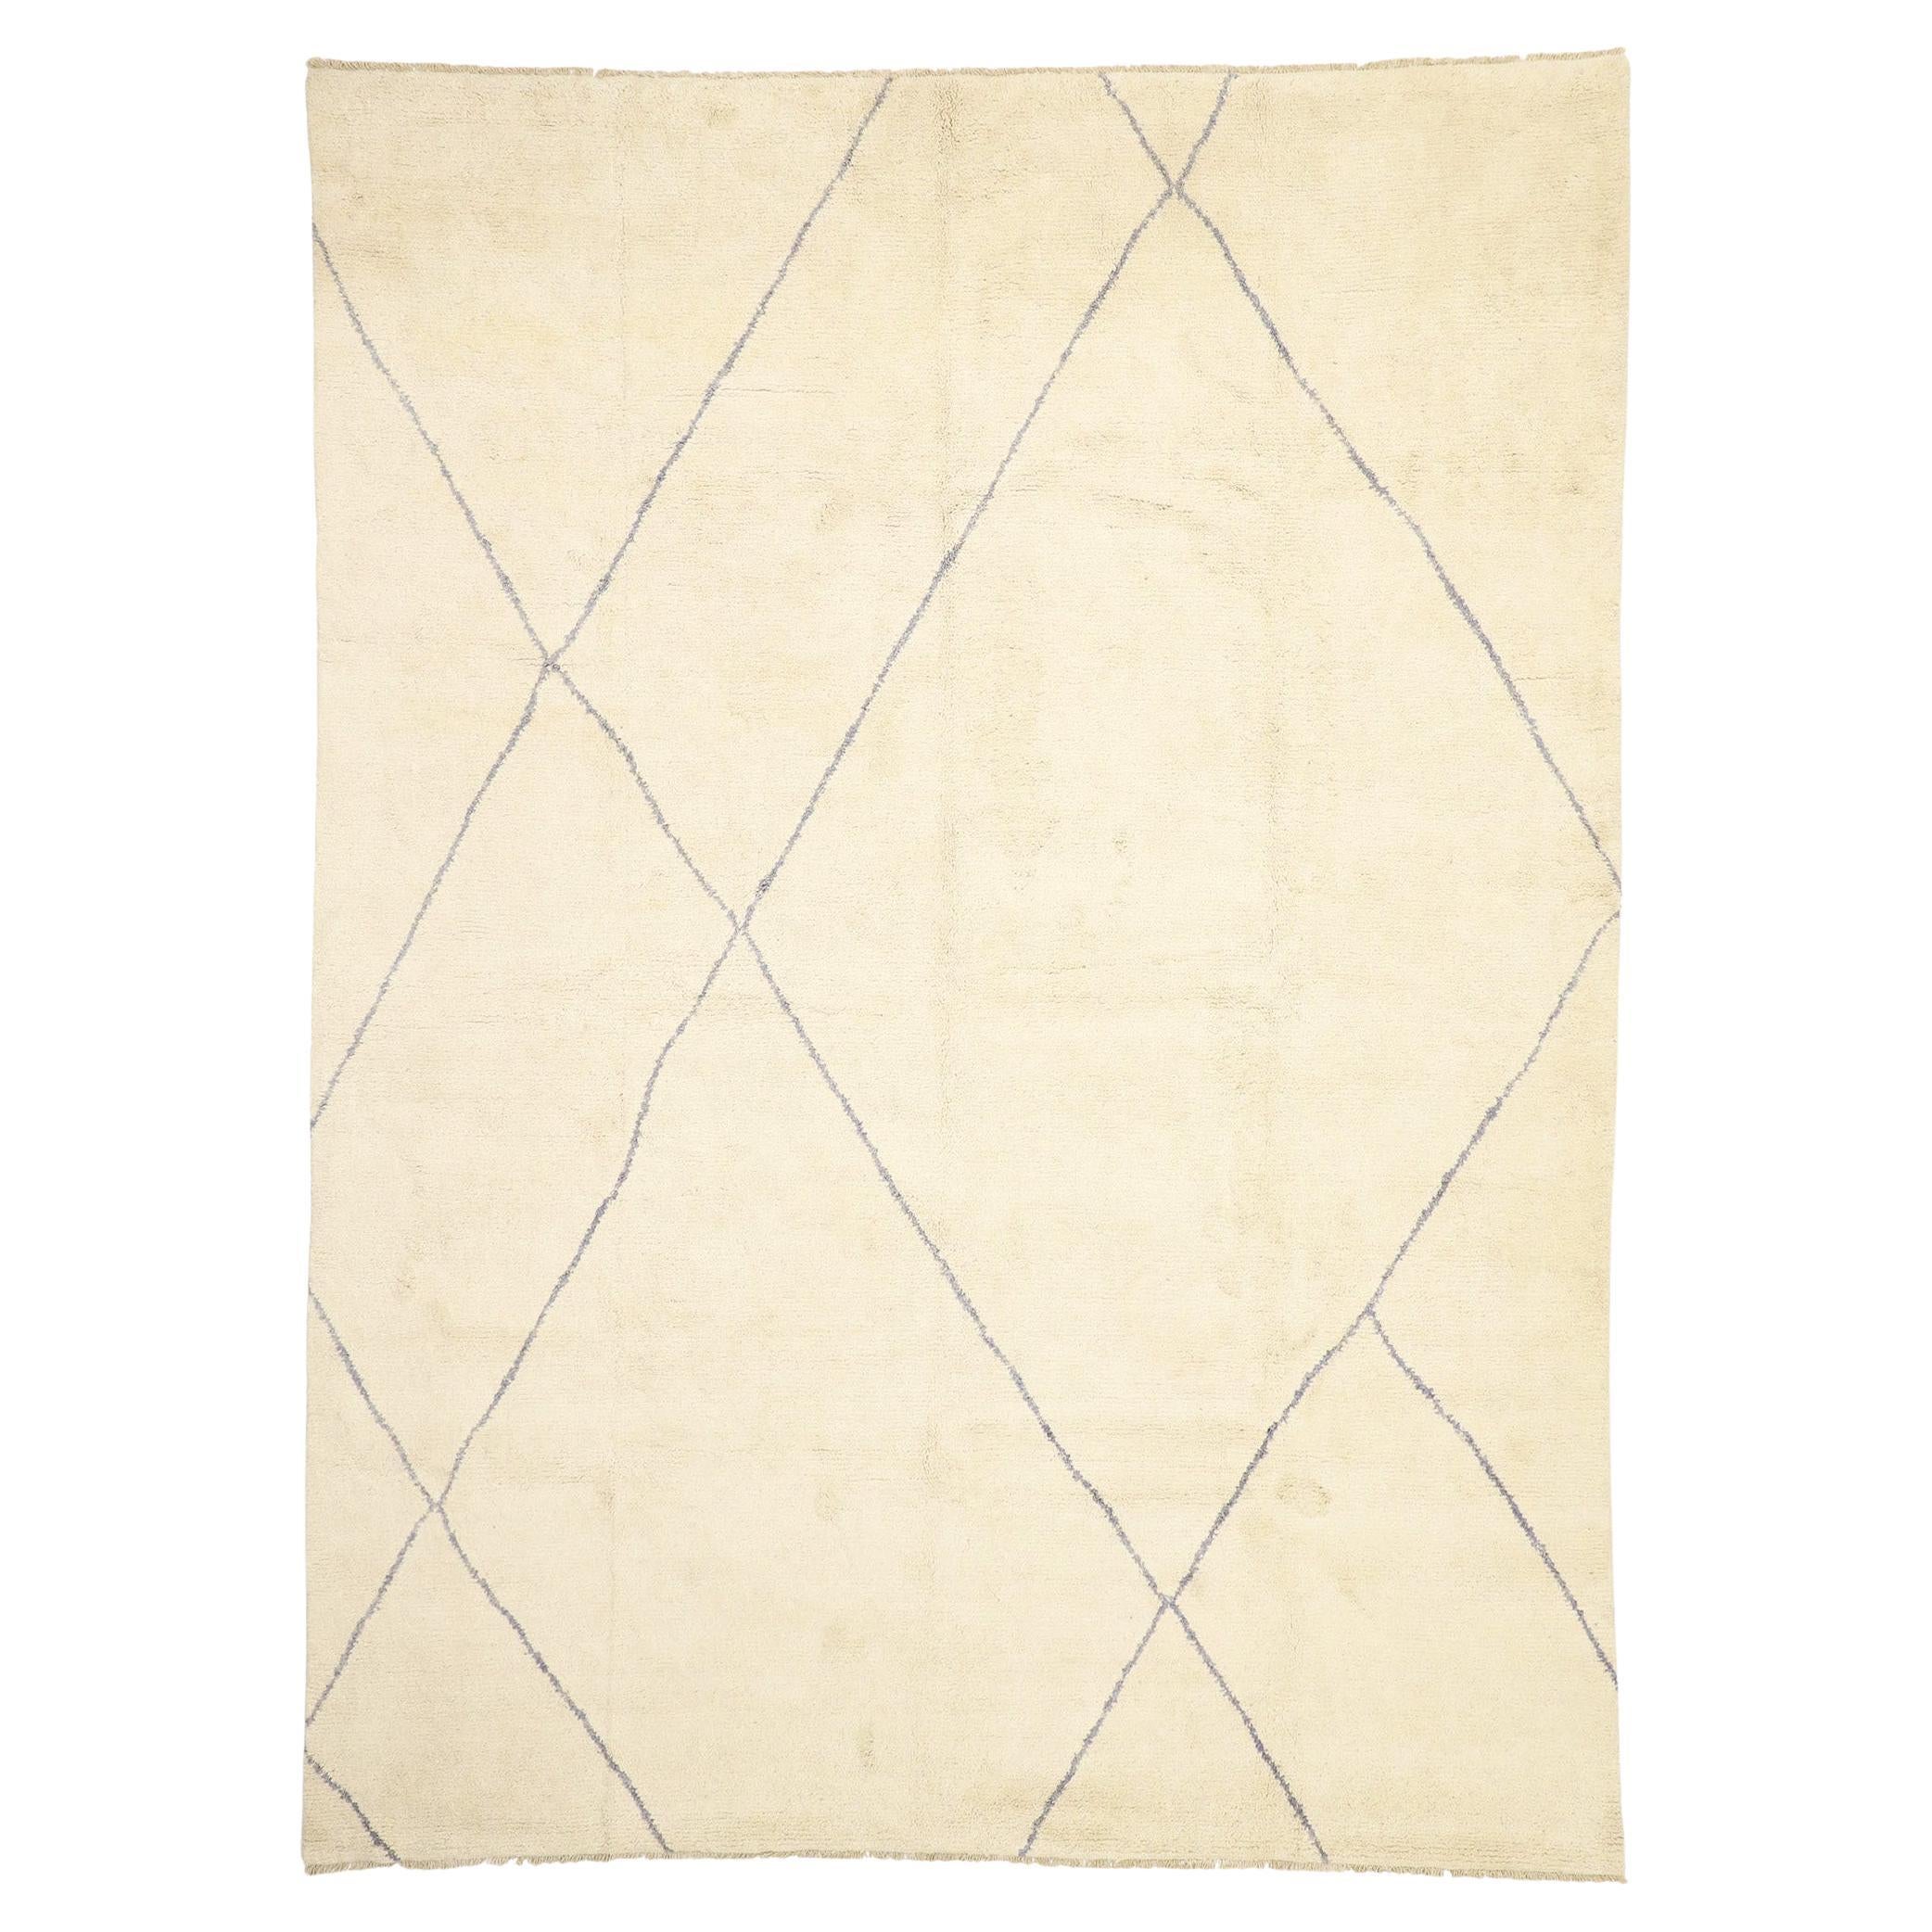 Contemporary Moroccan Rug, Organic Modern Meets Subtle Shibui For Sale